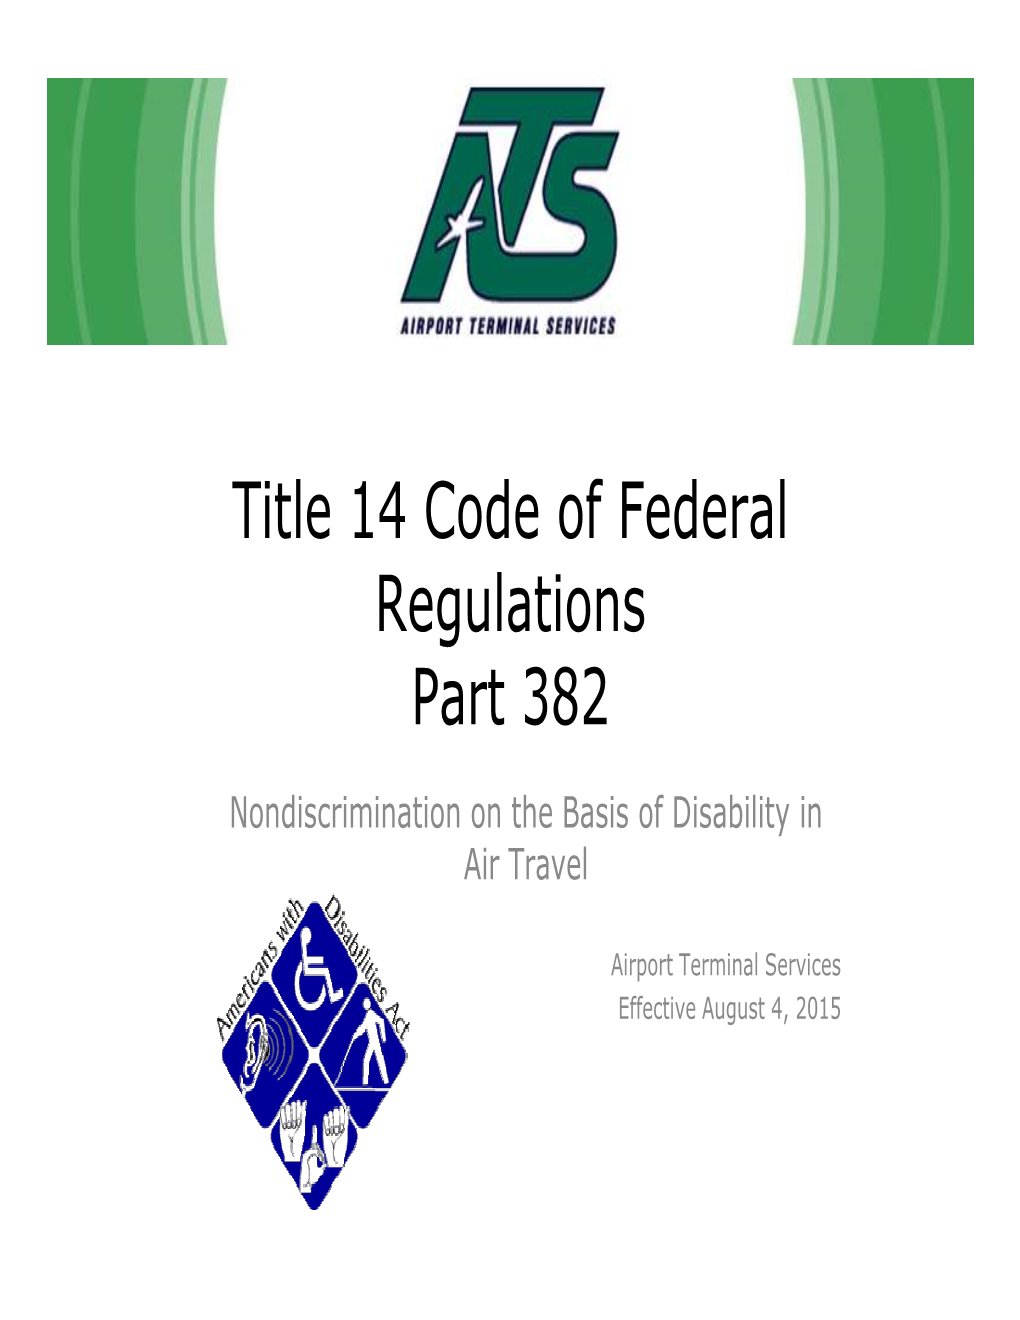 Title 14 Code of Federal Regulations Part 382